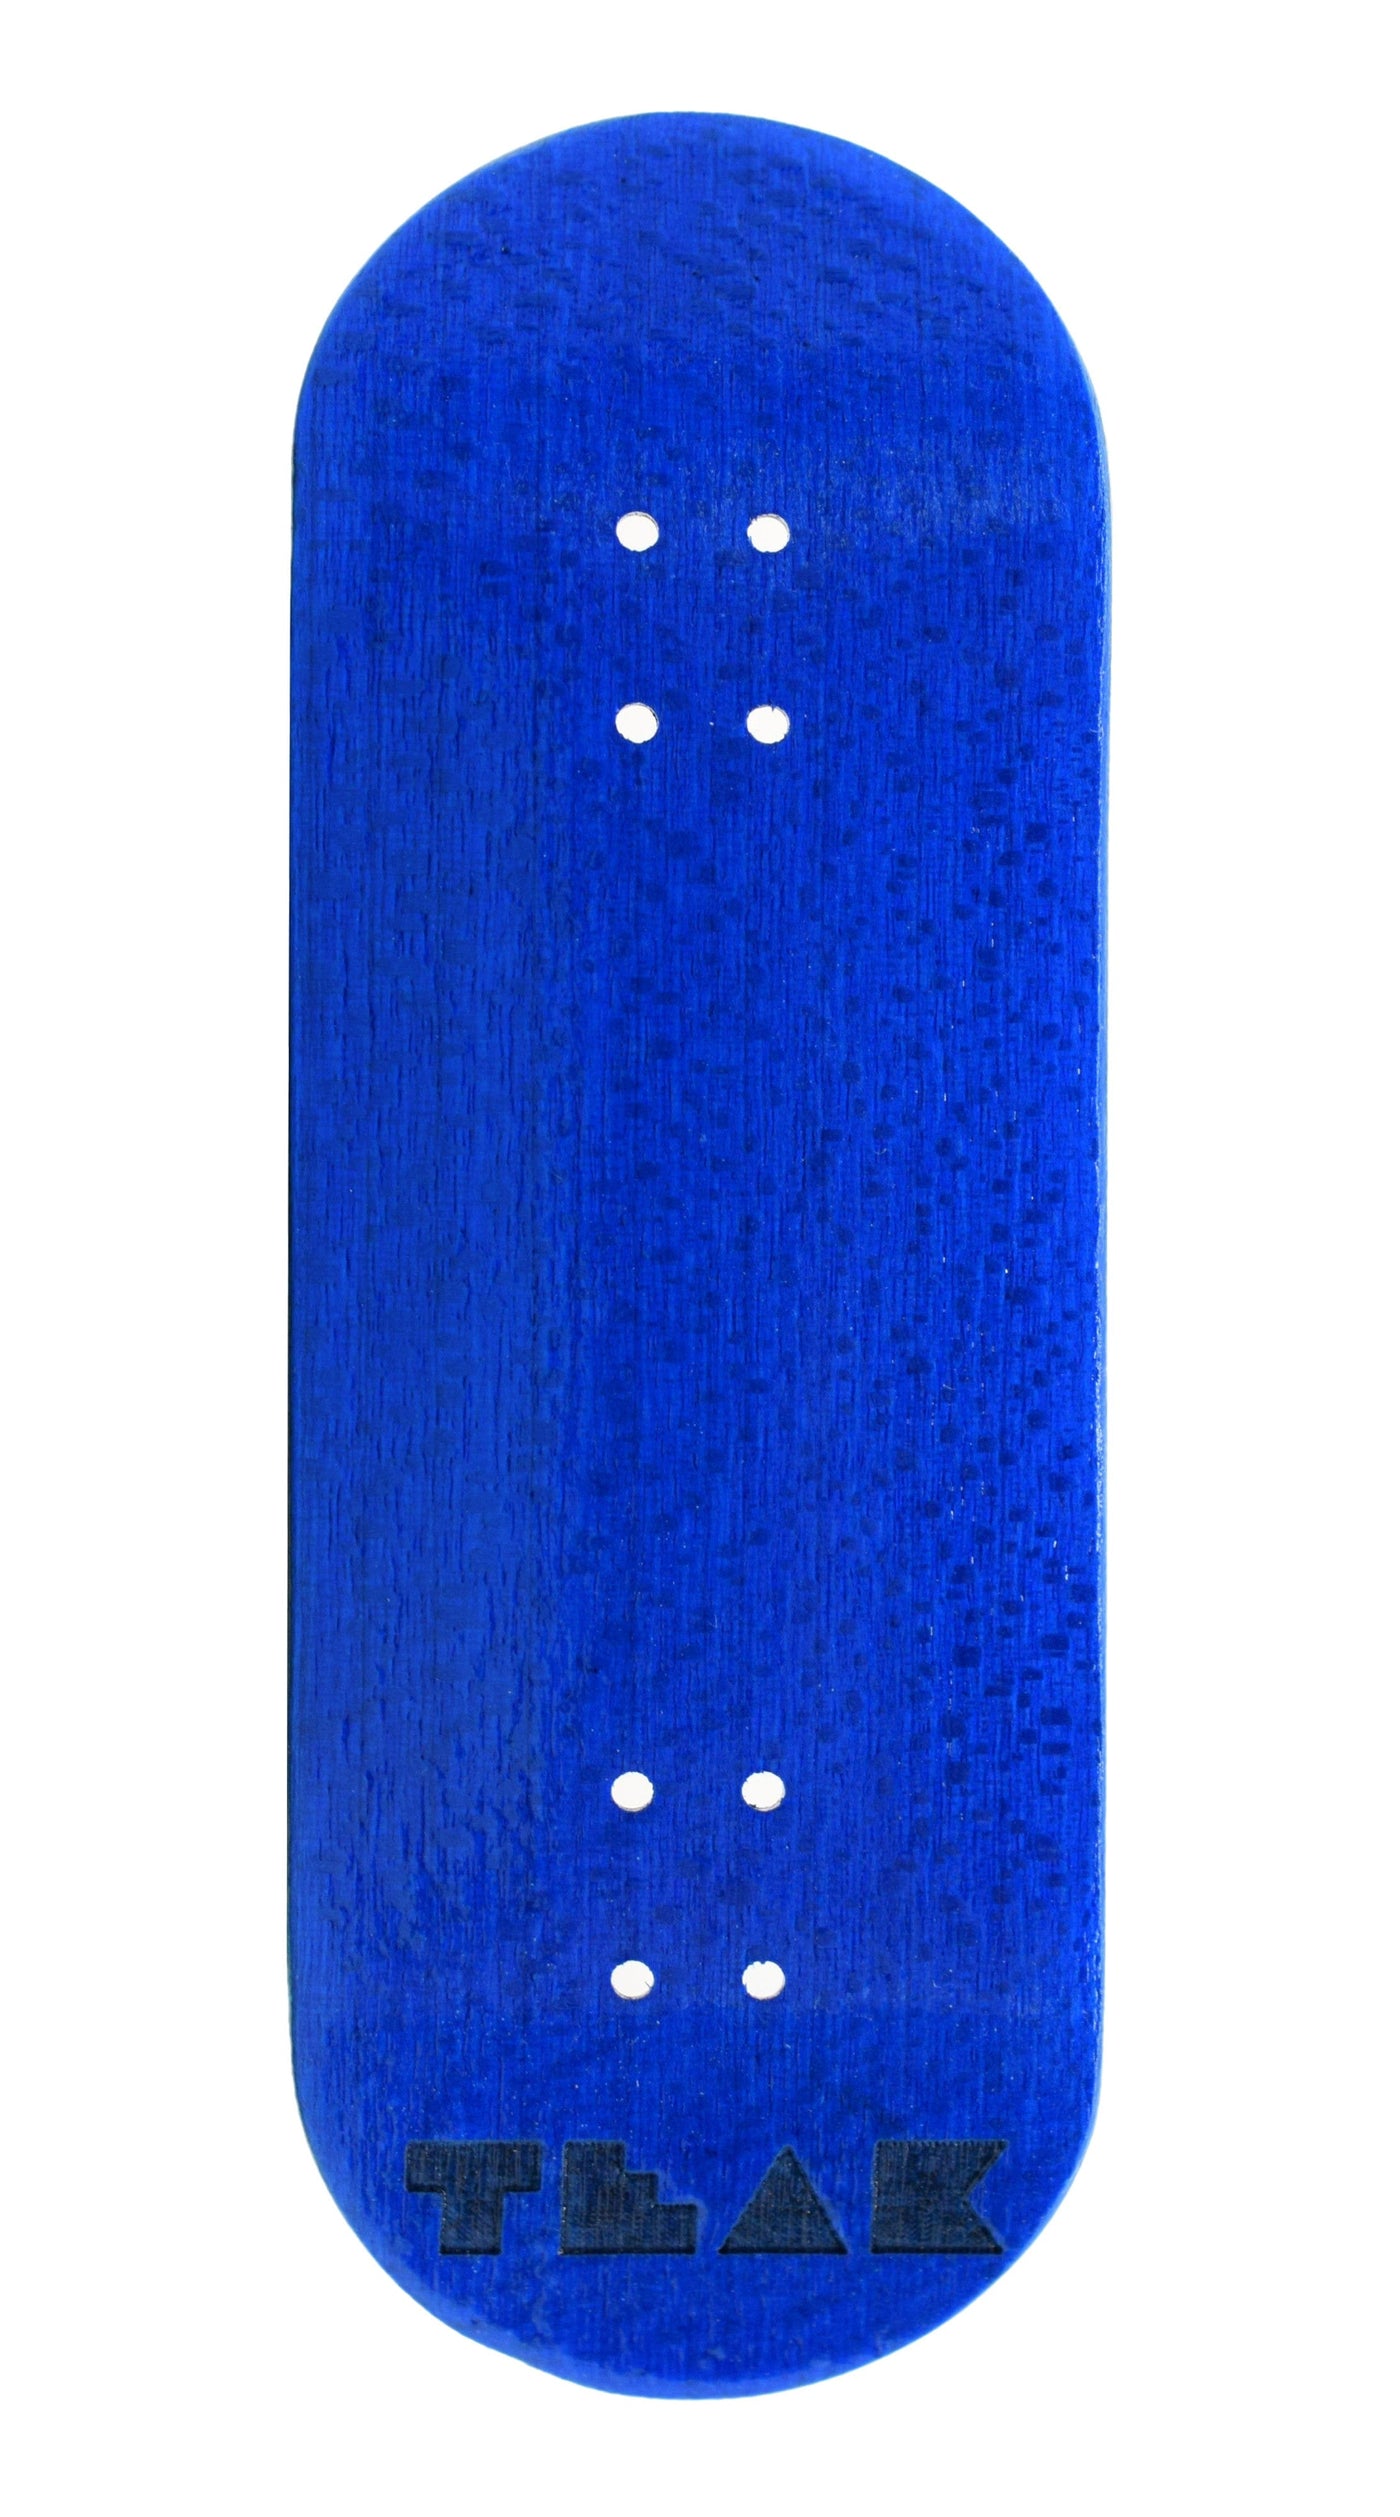 Teak Tuning PROlific Wooden 5 Ply Fingerboard Deck 35x95mm - Blizzard Blue - with Color Matching Mid Ply